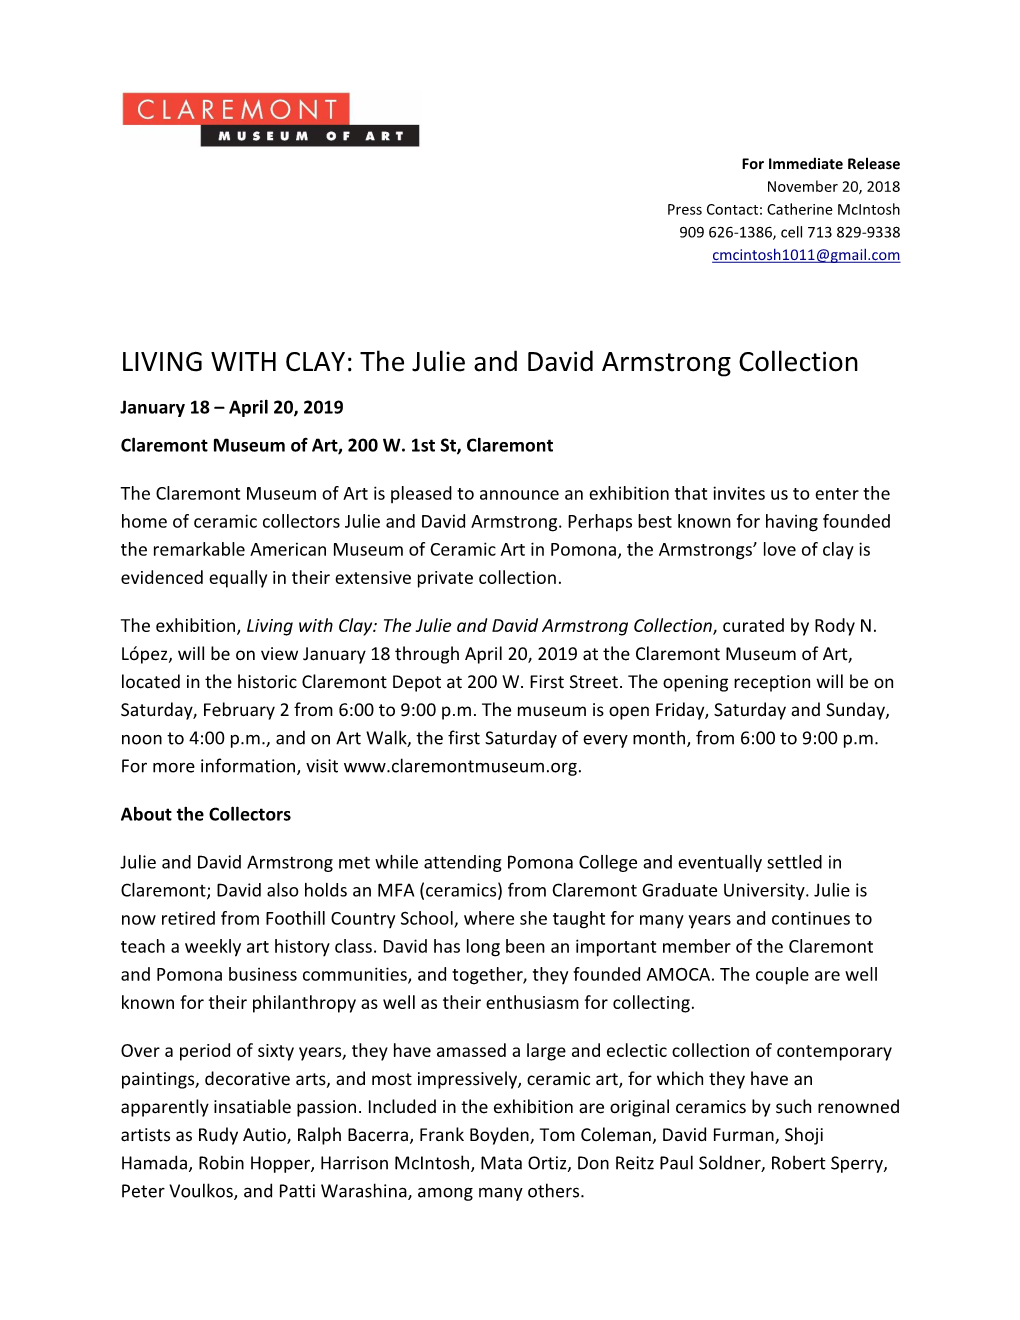 LIVING with CLAY: the Julie and David Armstrong Collection